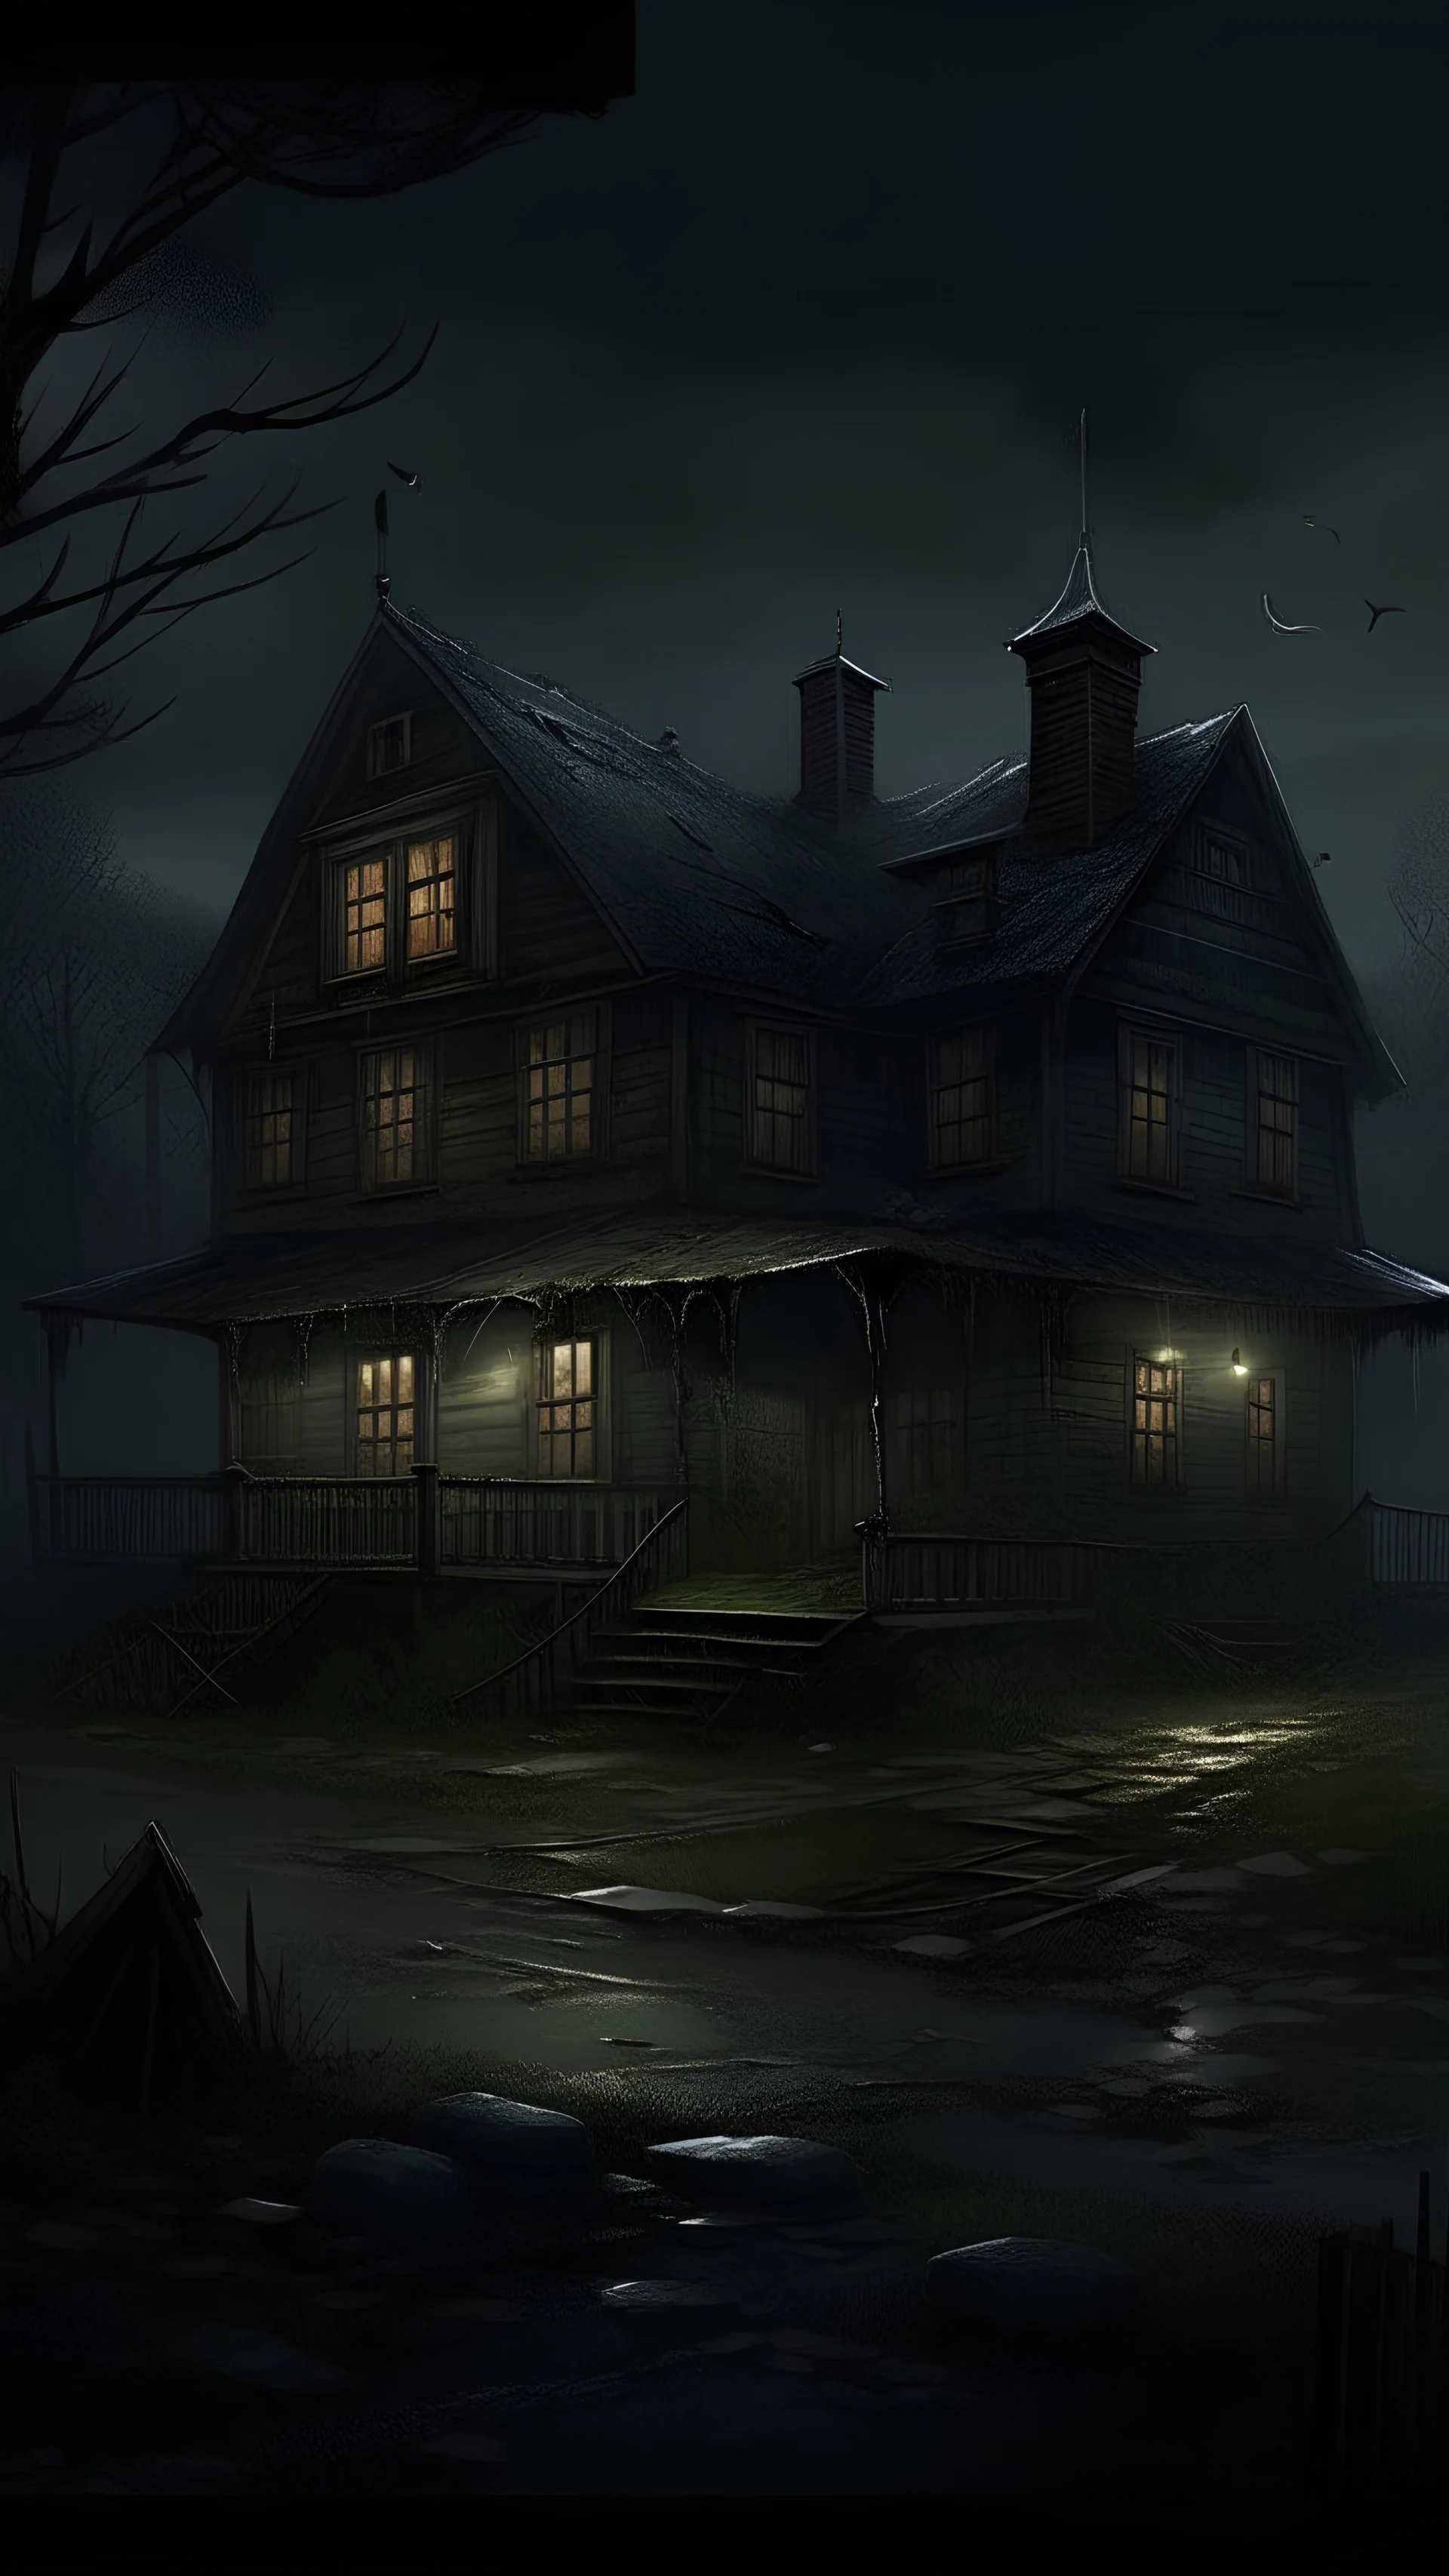 On that cold and dark night, the picture tells about Jason, who settled on the idea of acquiring a beautiful house on the outskirts of the quiet town. The House appears in the center of the description as an old and abandoned place, where its peculiar attractiveness reflects its tempting price, which Jason could not resist. Mysterious tension permeates the conversation of local residents, who tell stories about the dark history of the house, its strange incidents and the appearance of ghosts on